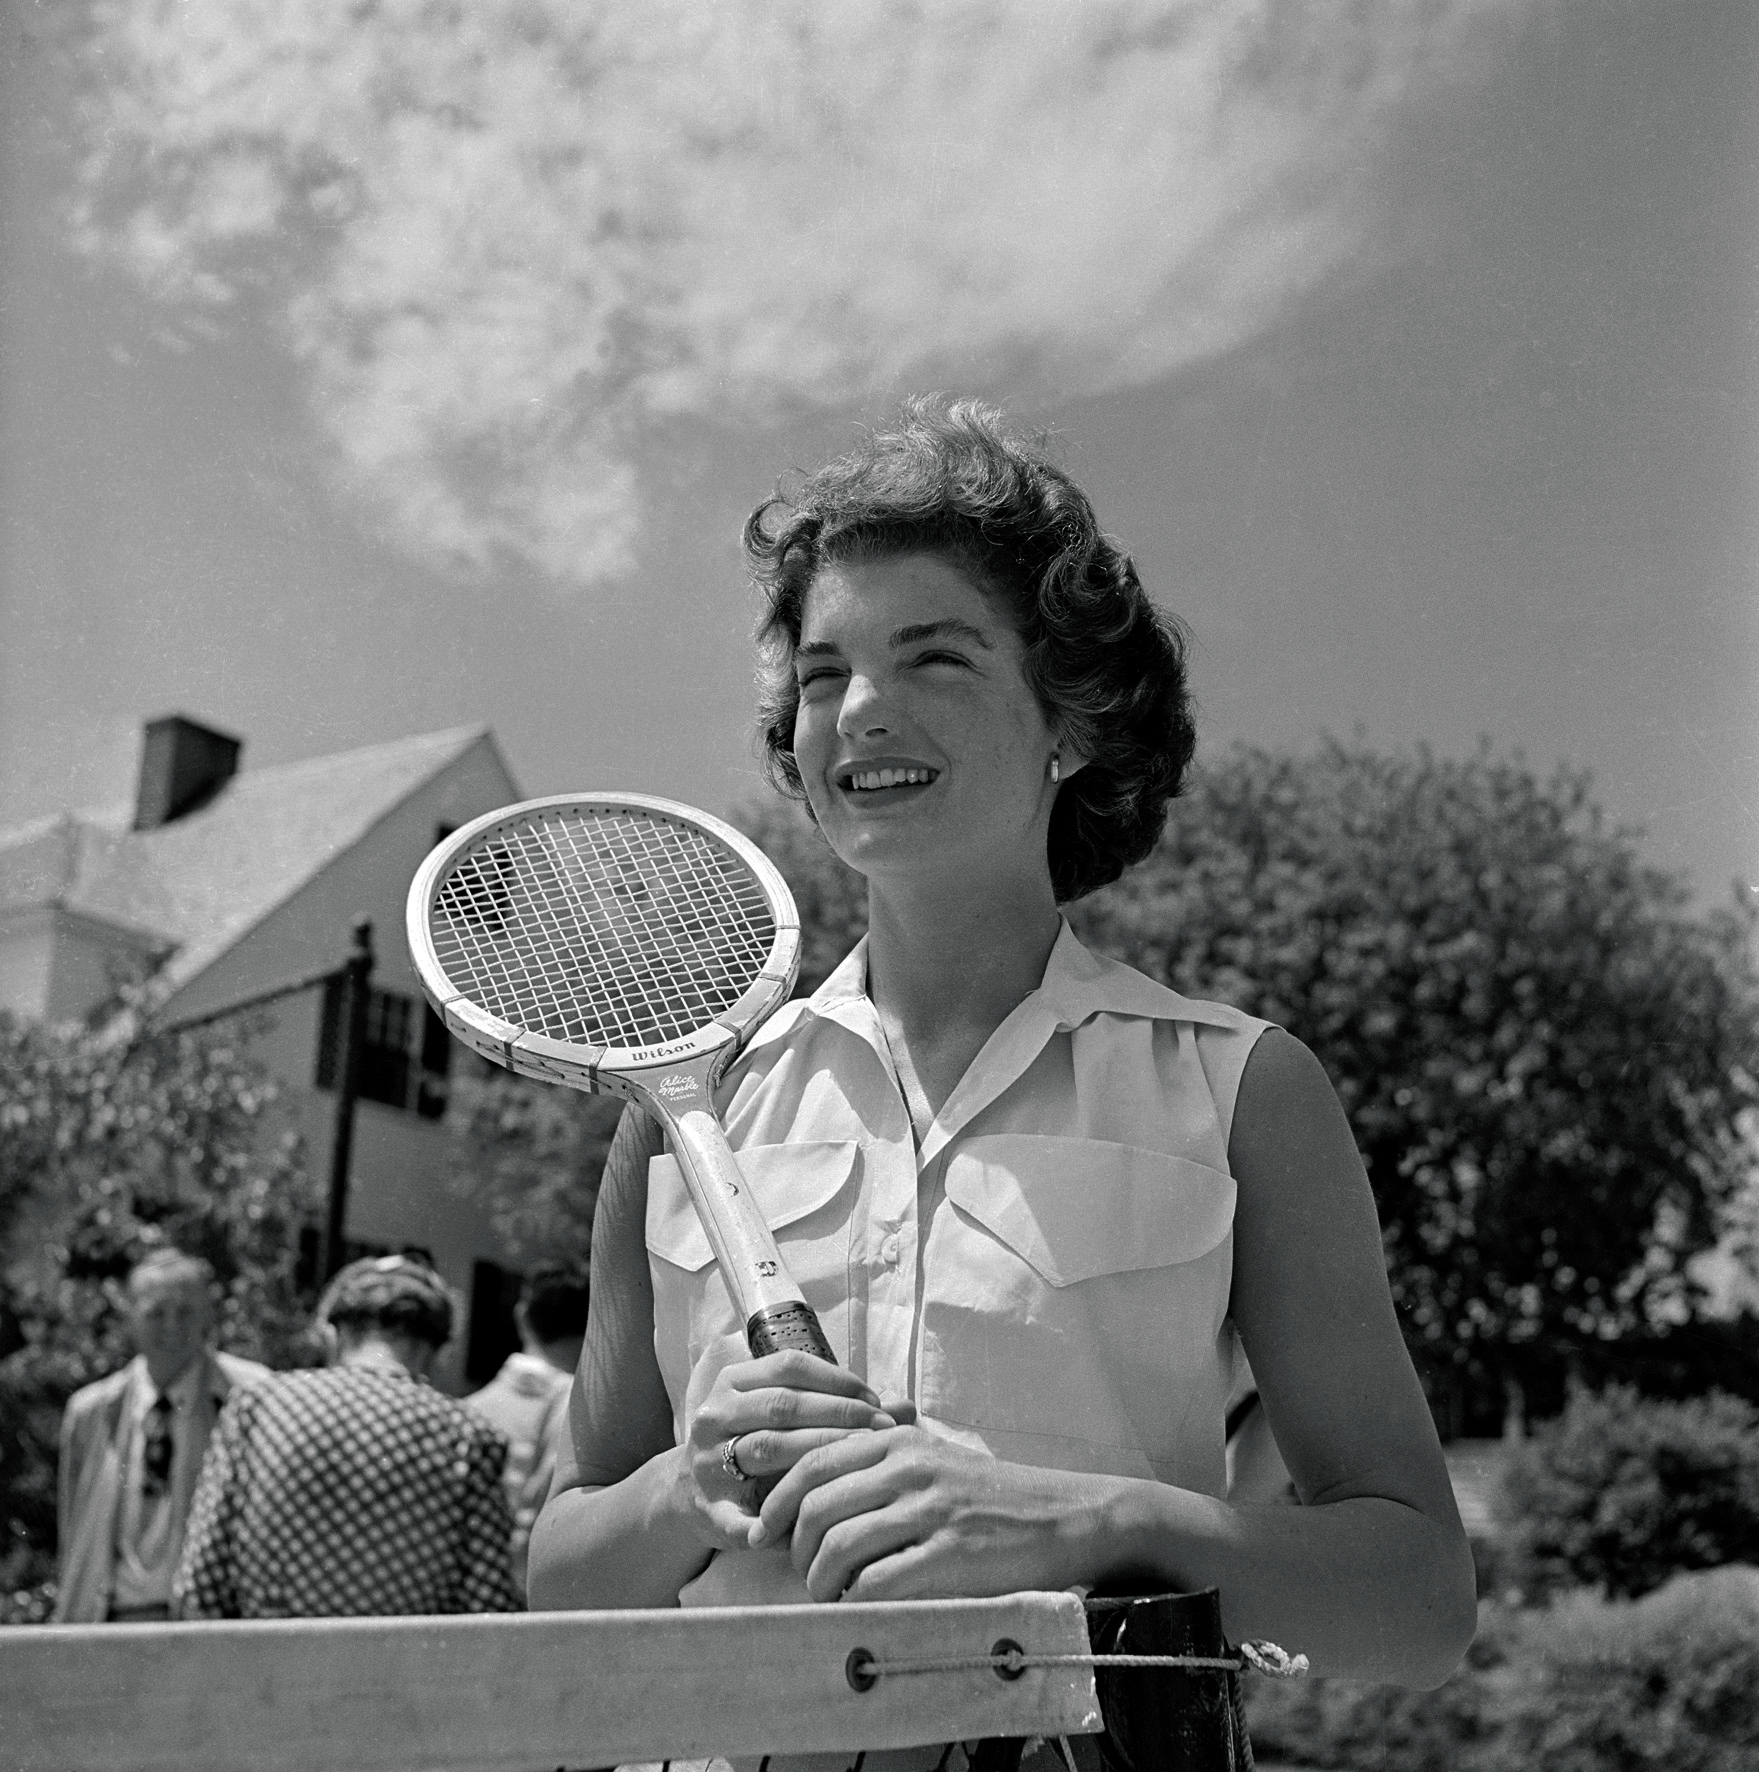   © The Stylish Life - Tennis, published by teNeues, www.teneues.com. John F. Kennedy and His Wife, Photo © Bettmann/CORBIS.  